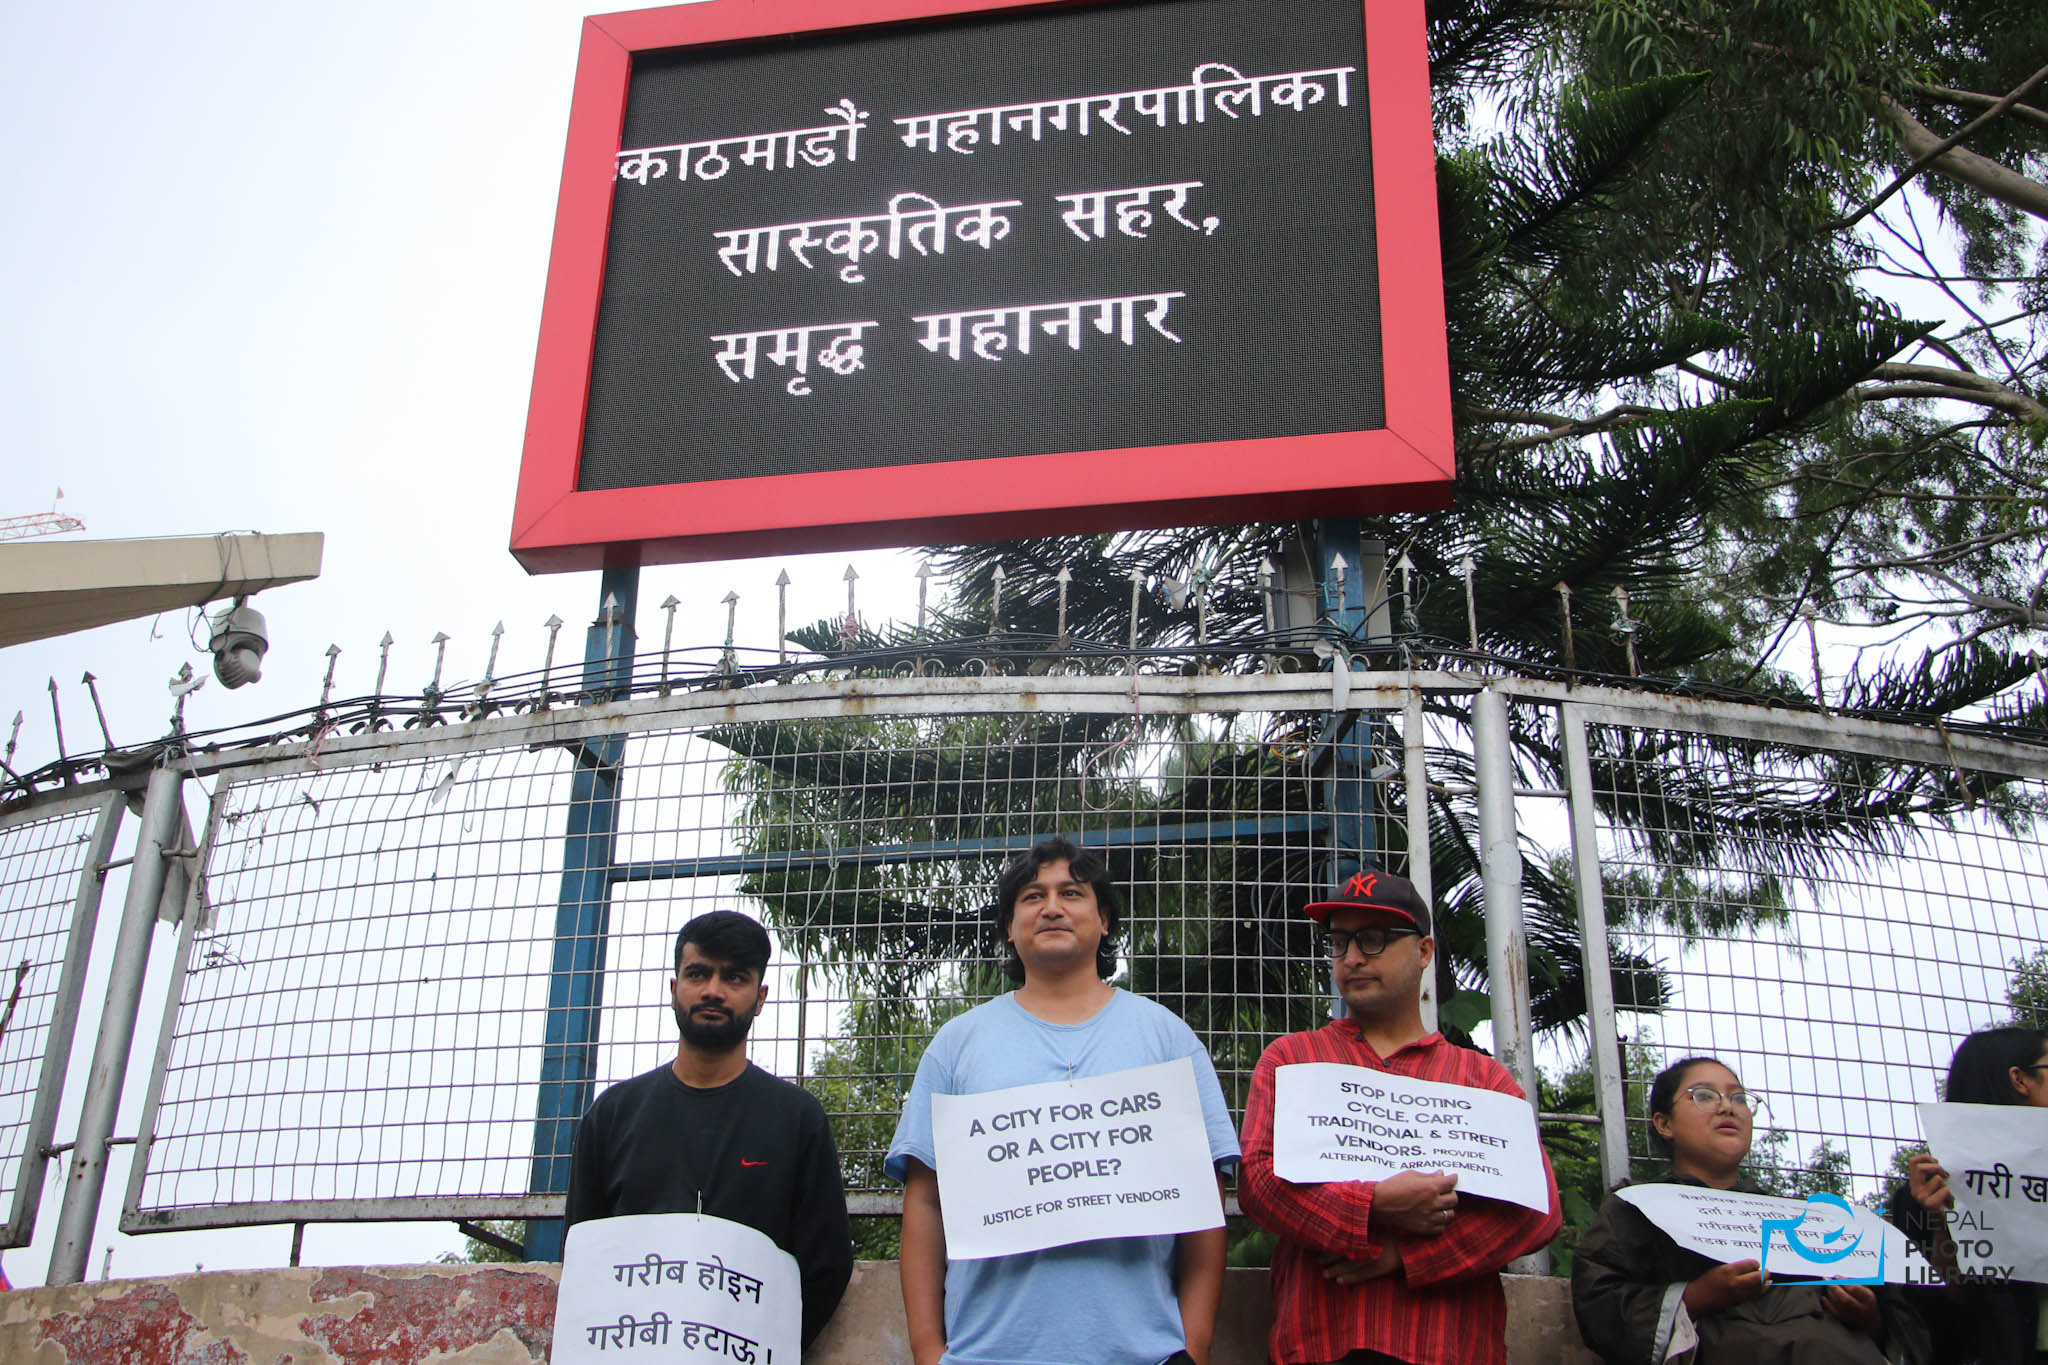 77-hour standing protest in front of KMC (photos)